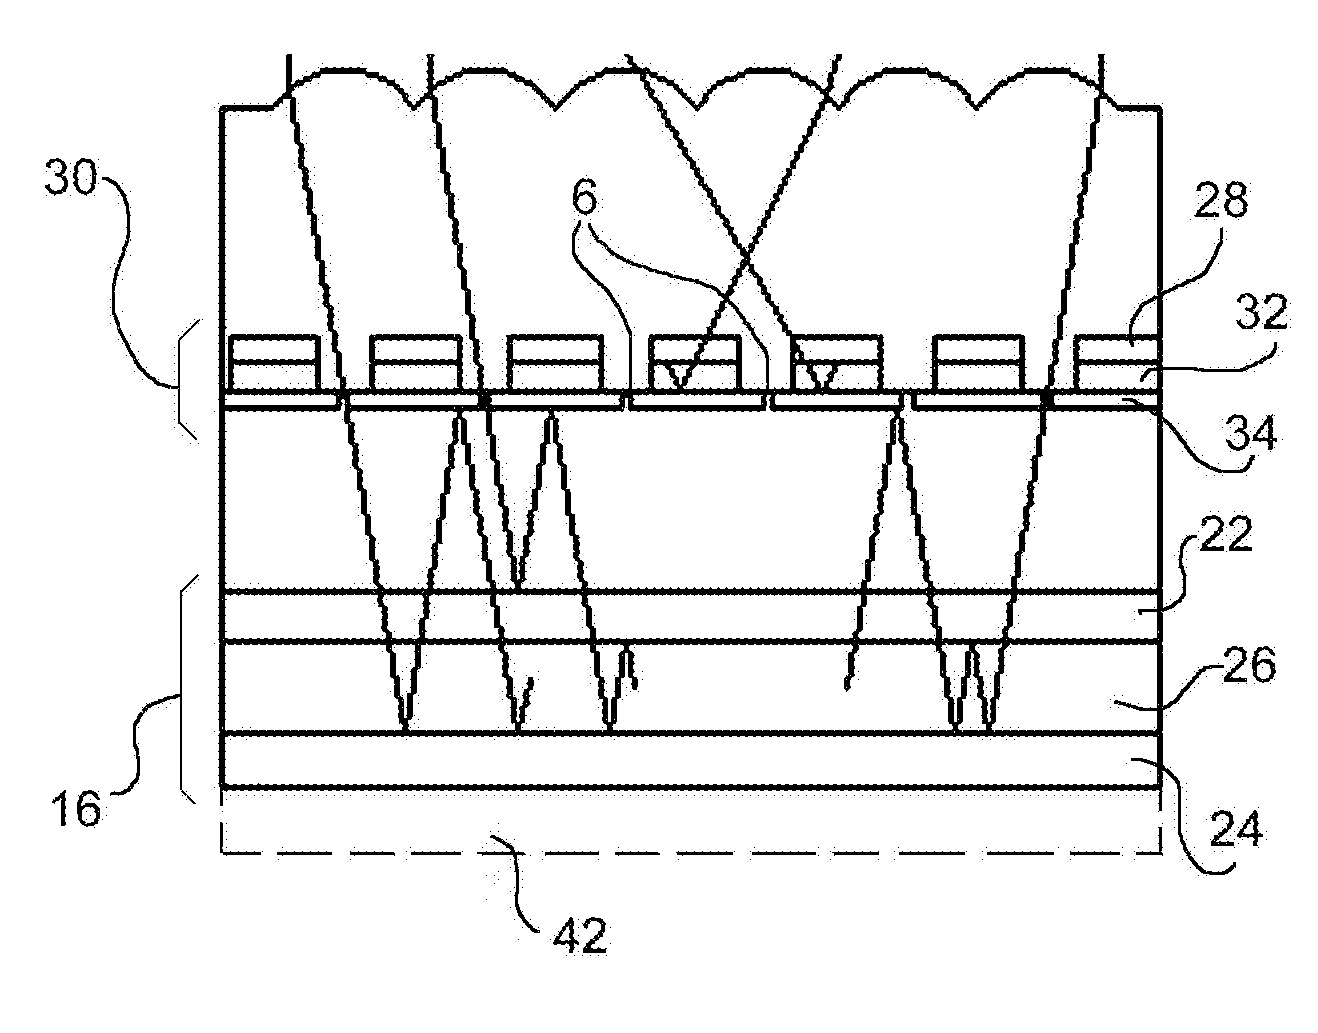 Photovoltaic device with enhanced light harvesting